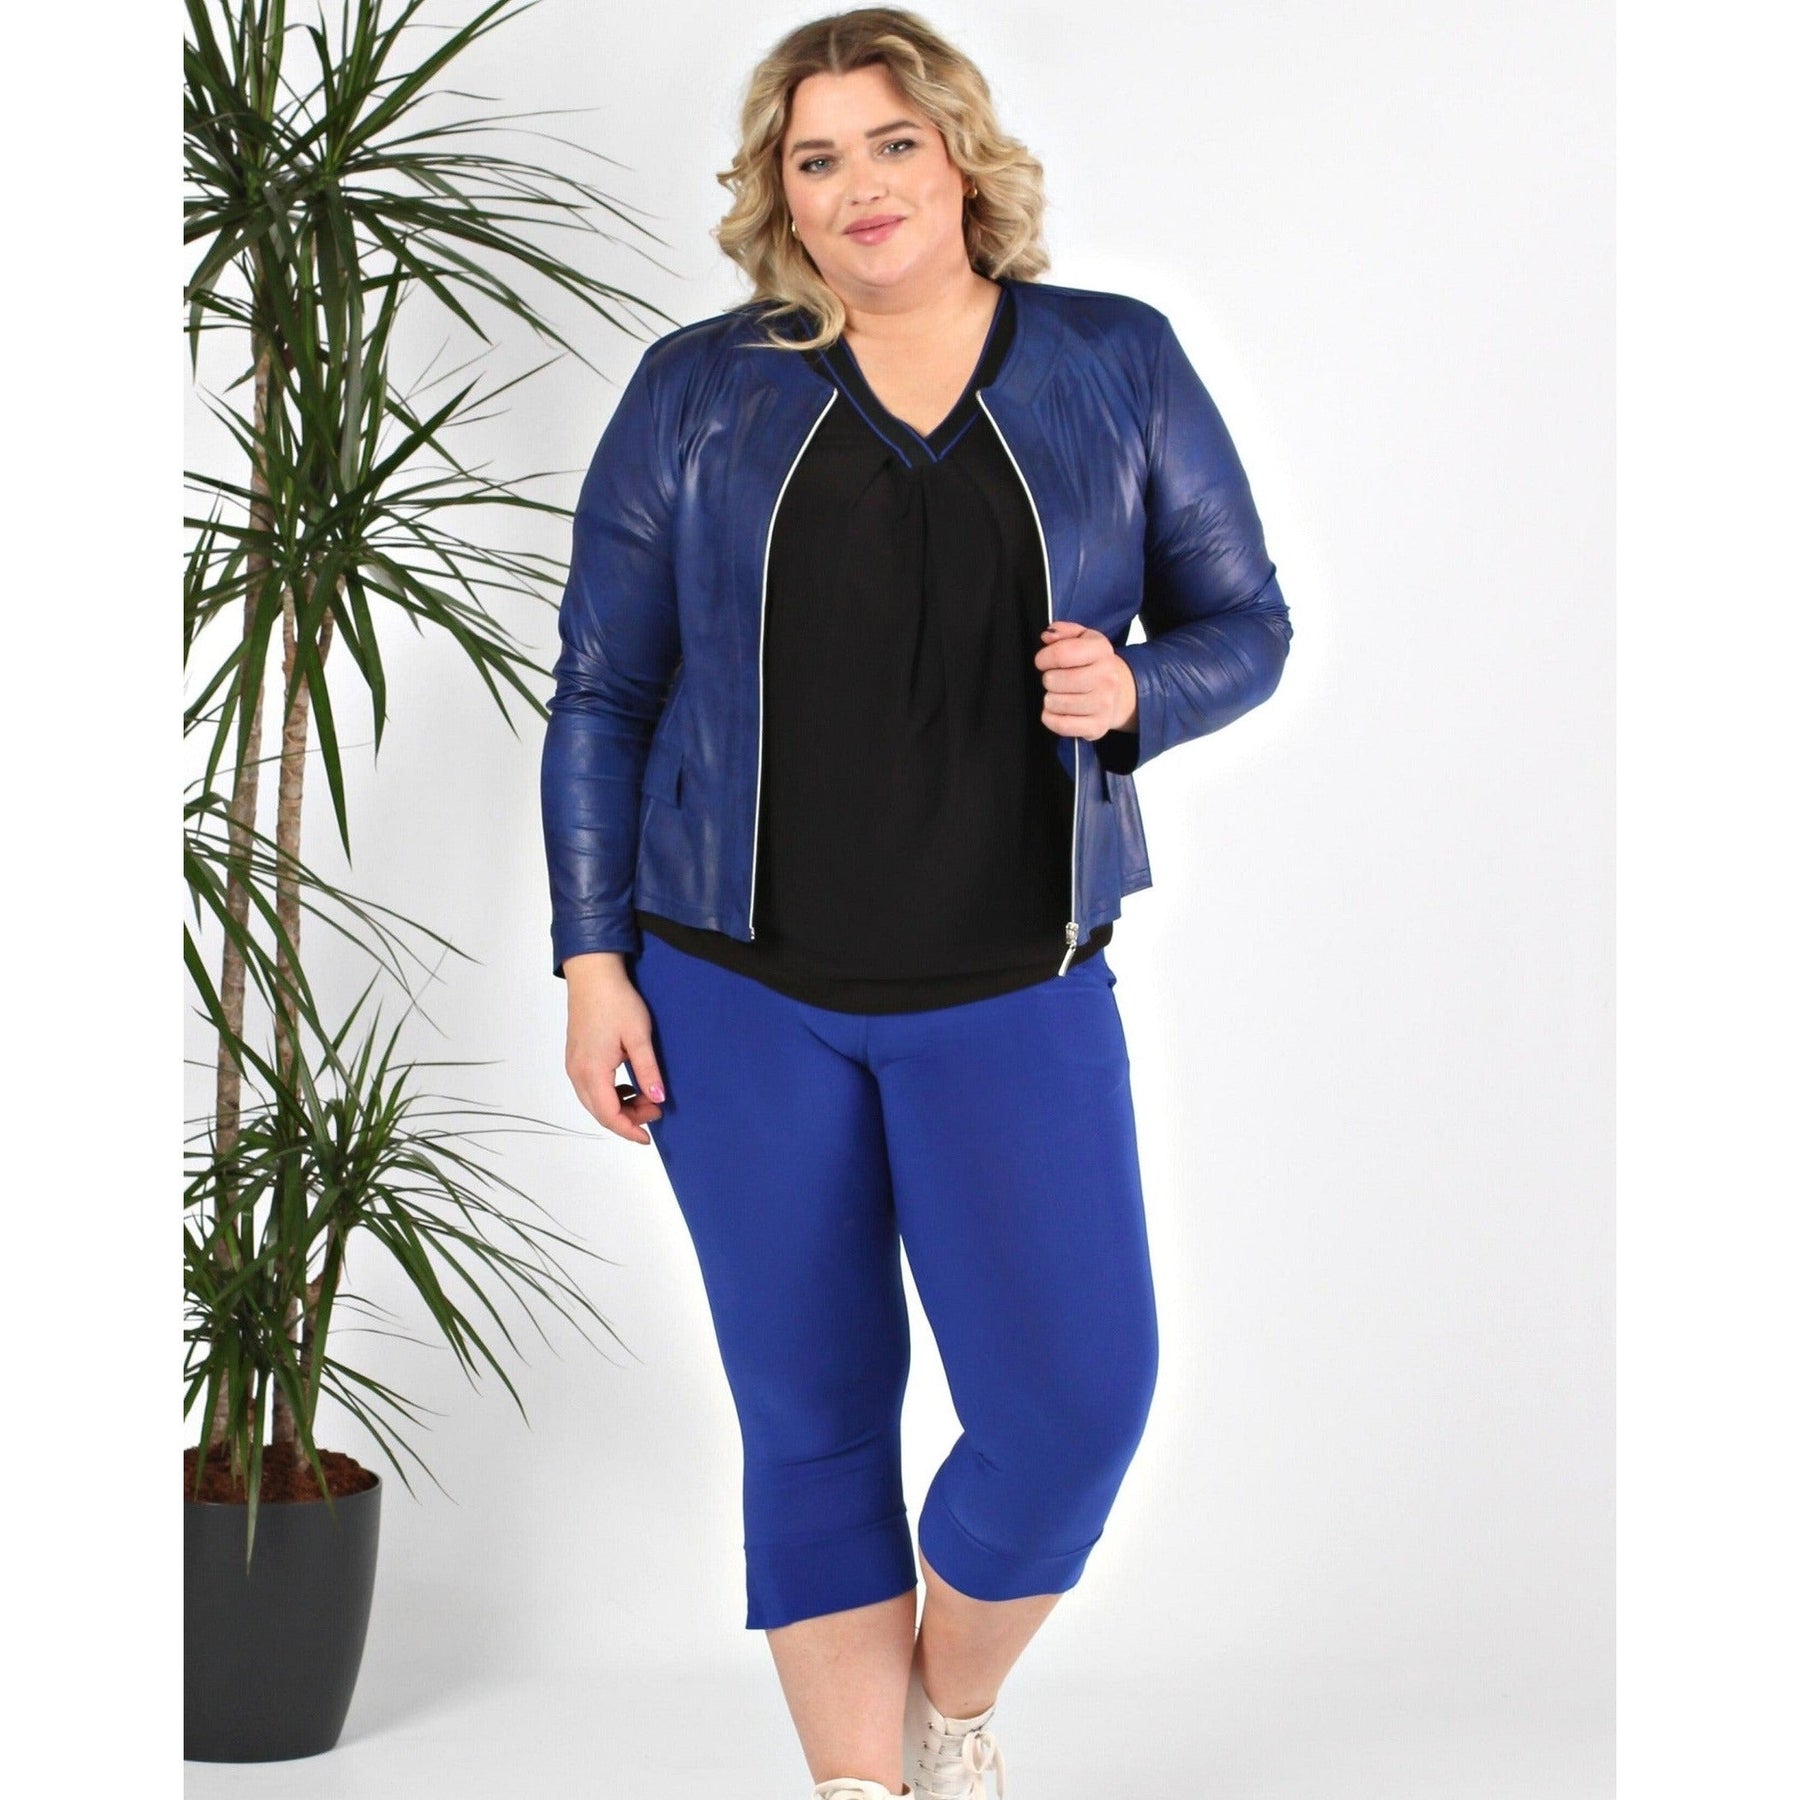 Magna Leather Look Jacket in Royal Blue - Wardrobe Plus